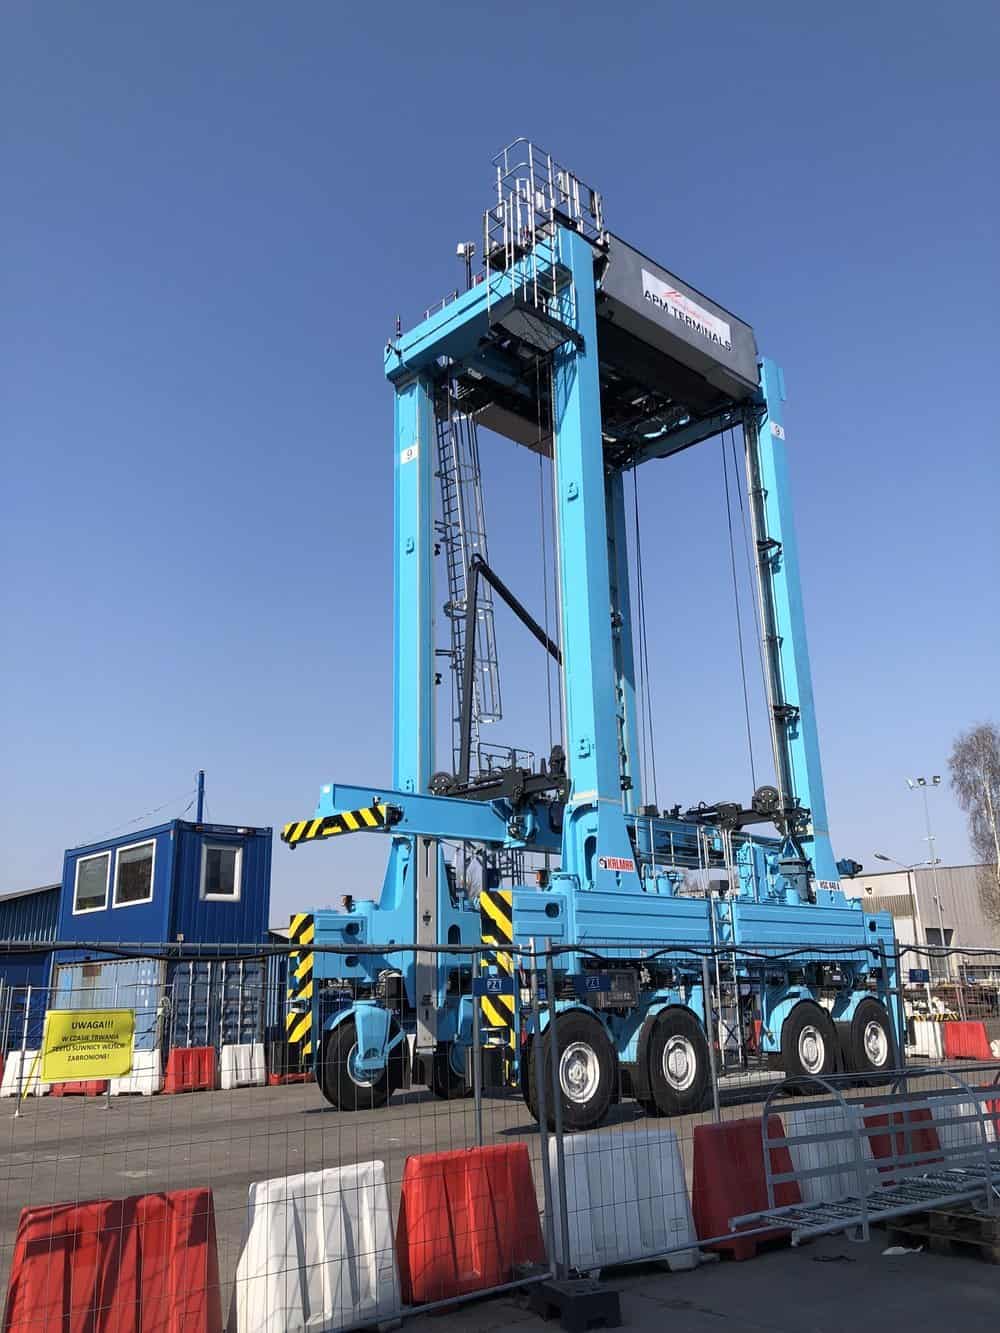  An automated straddle carrier that APM plans to test (Photo: APM) 